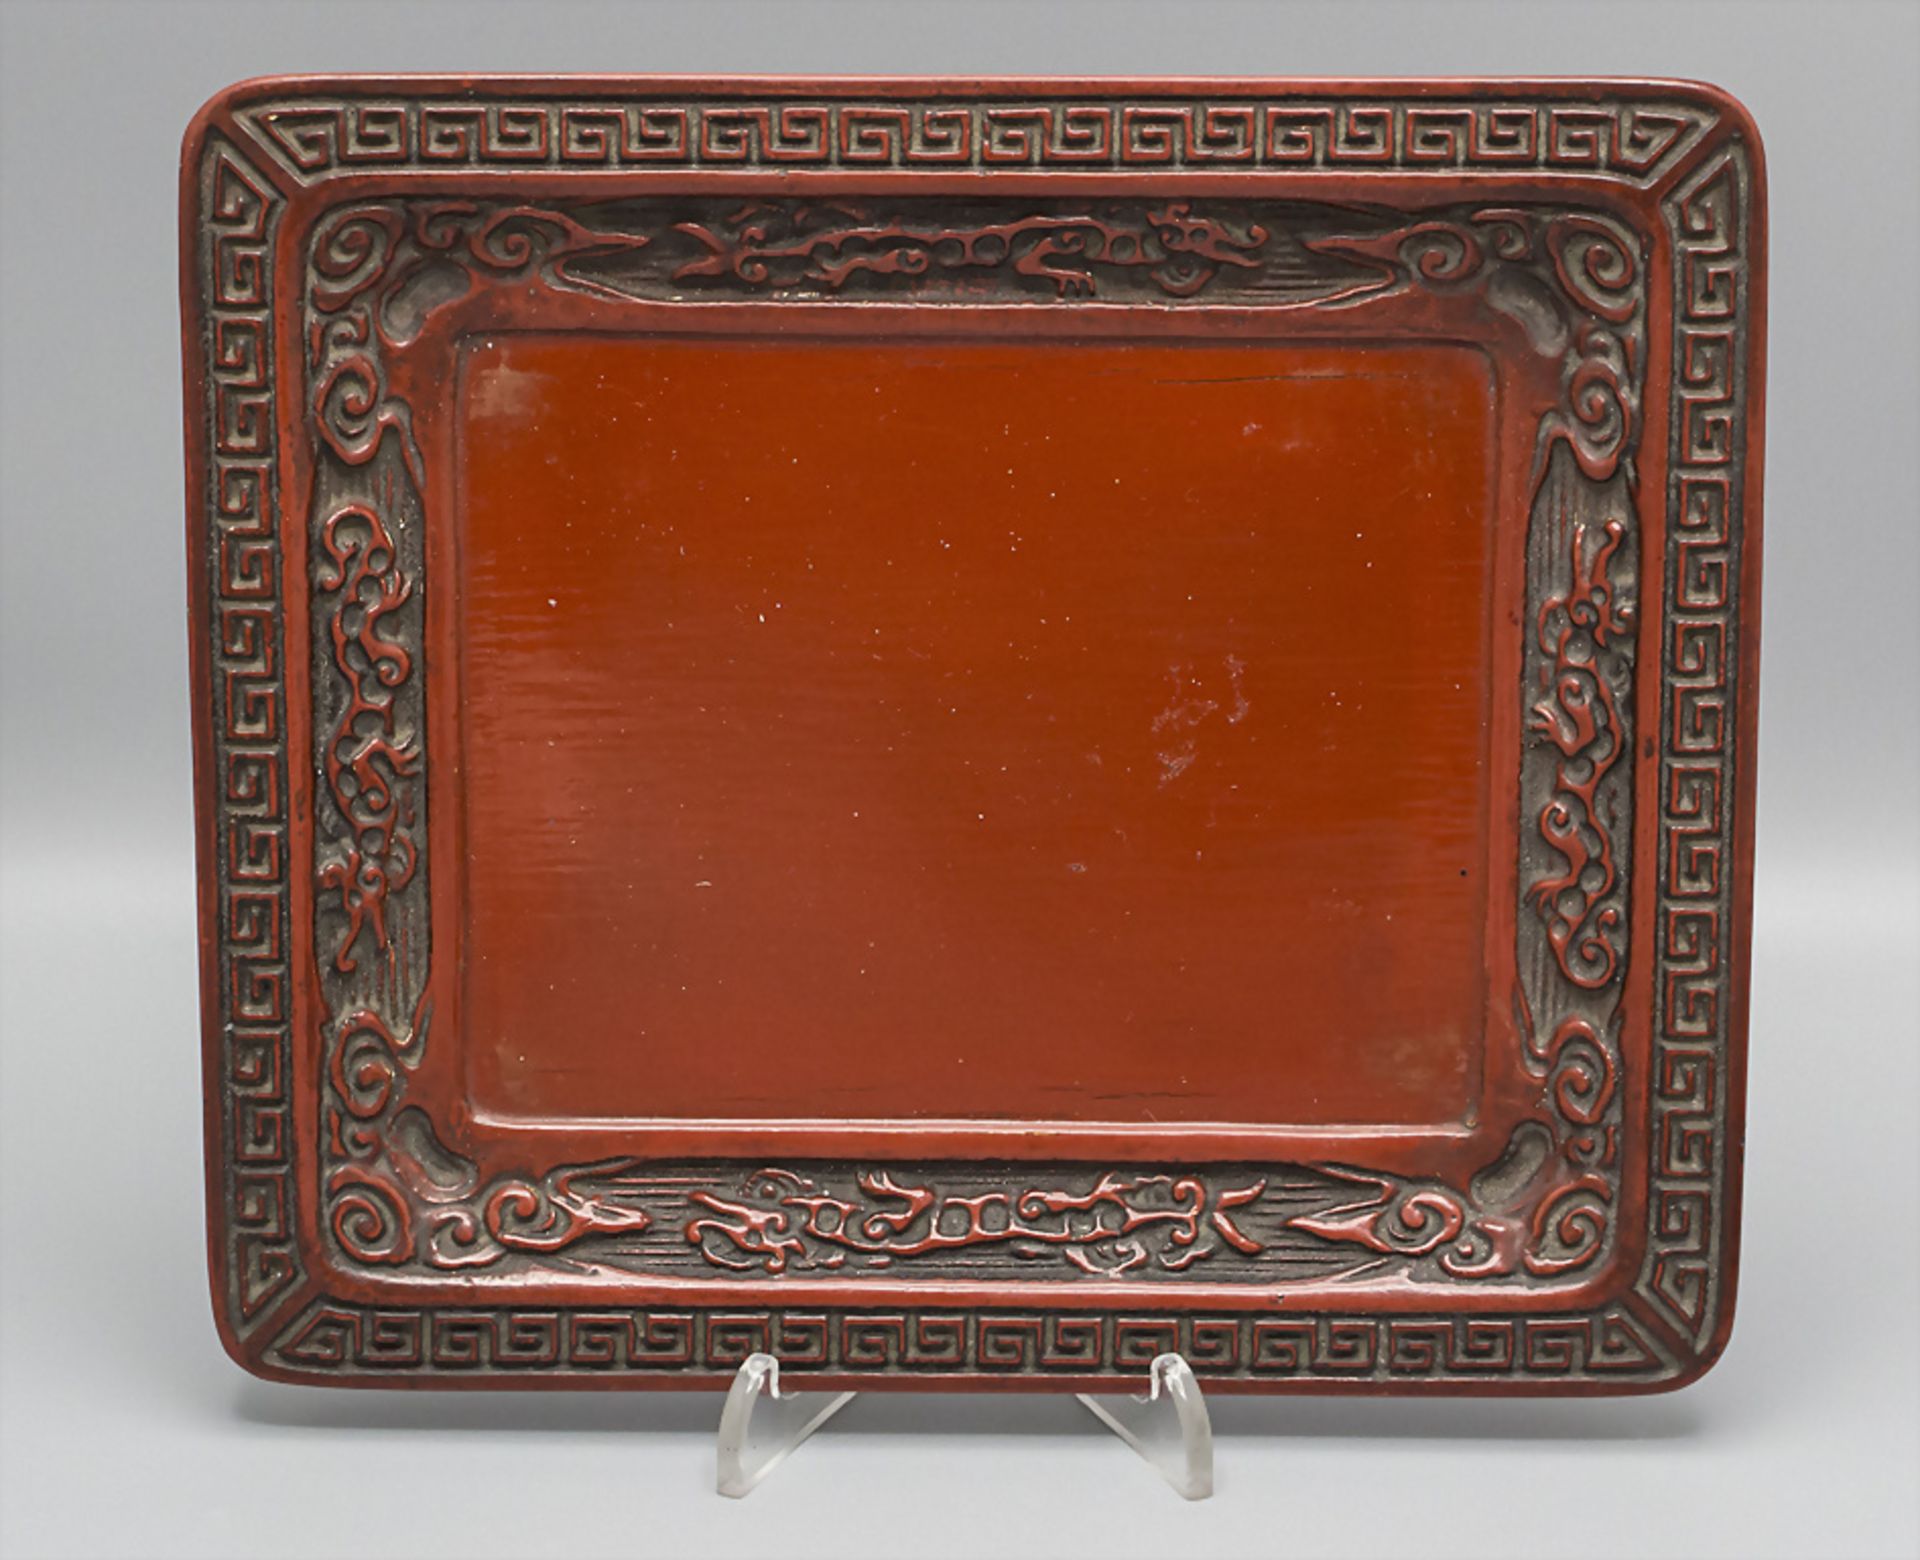 Lackdose mit Tablett / A lacquer box with tray, China, 19. Jh. - Image 4 of 7